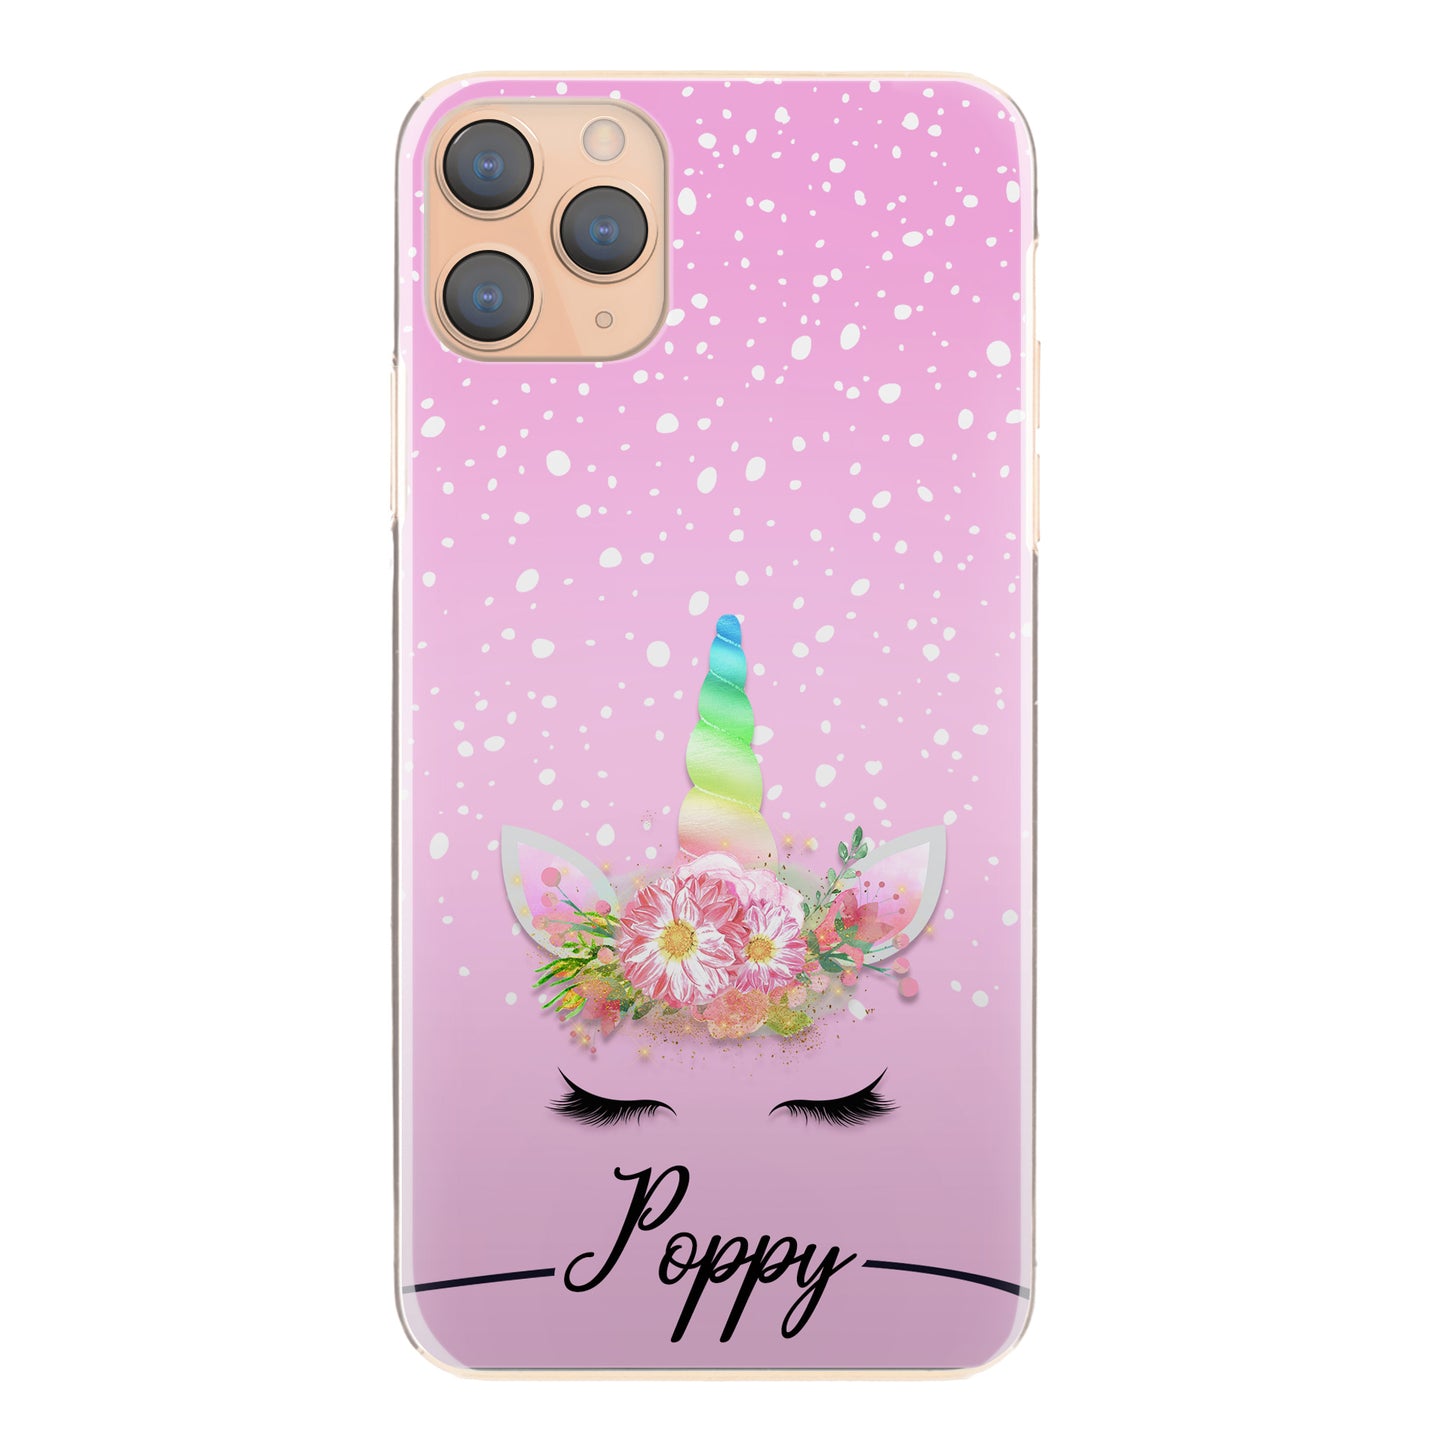 Personalised Apple iPhone Hard Case with Rainbow Floral Unicorn and Text on Pink